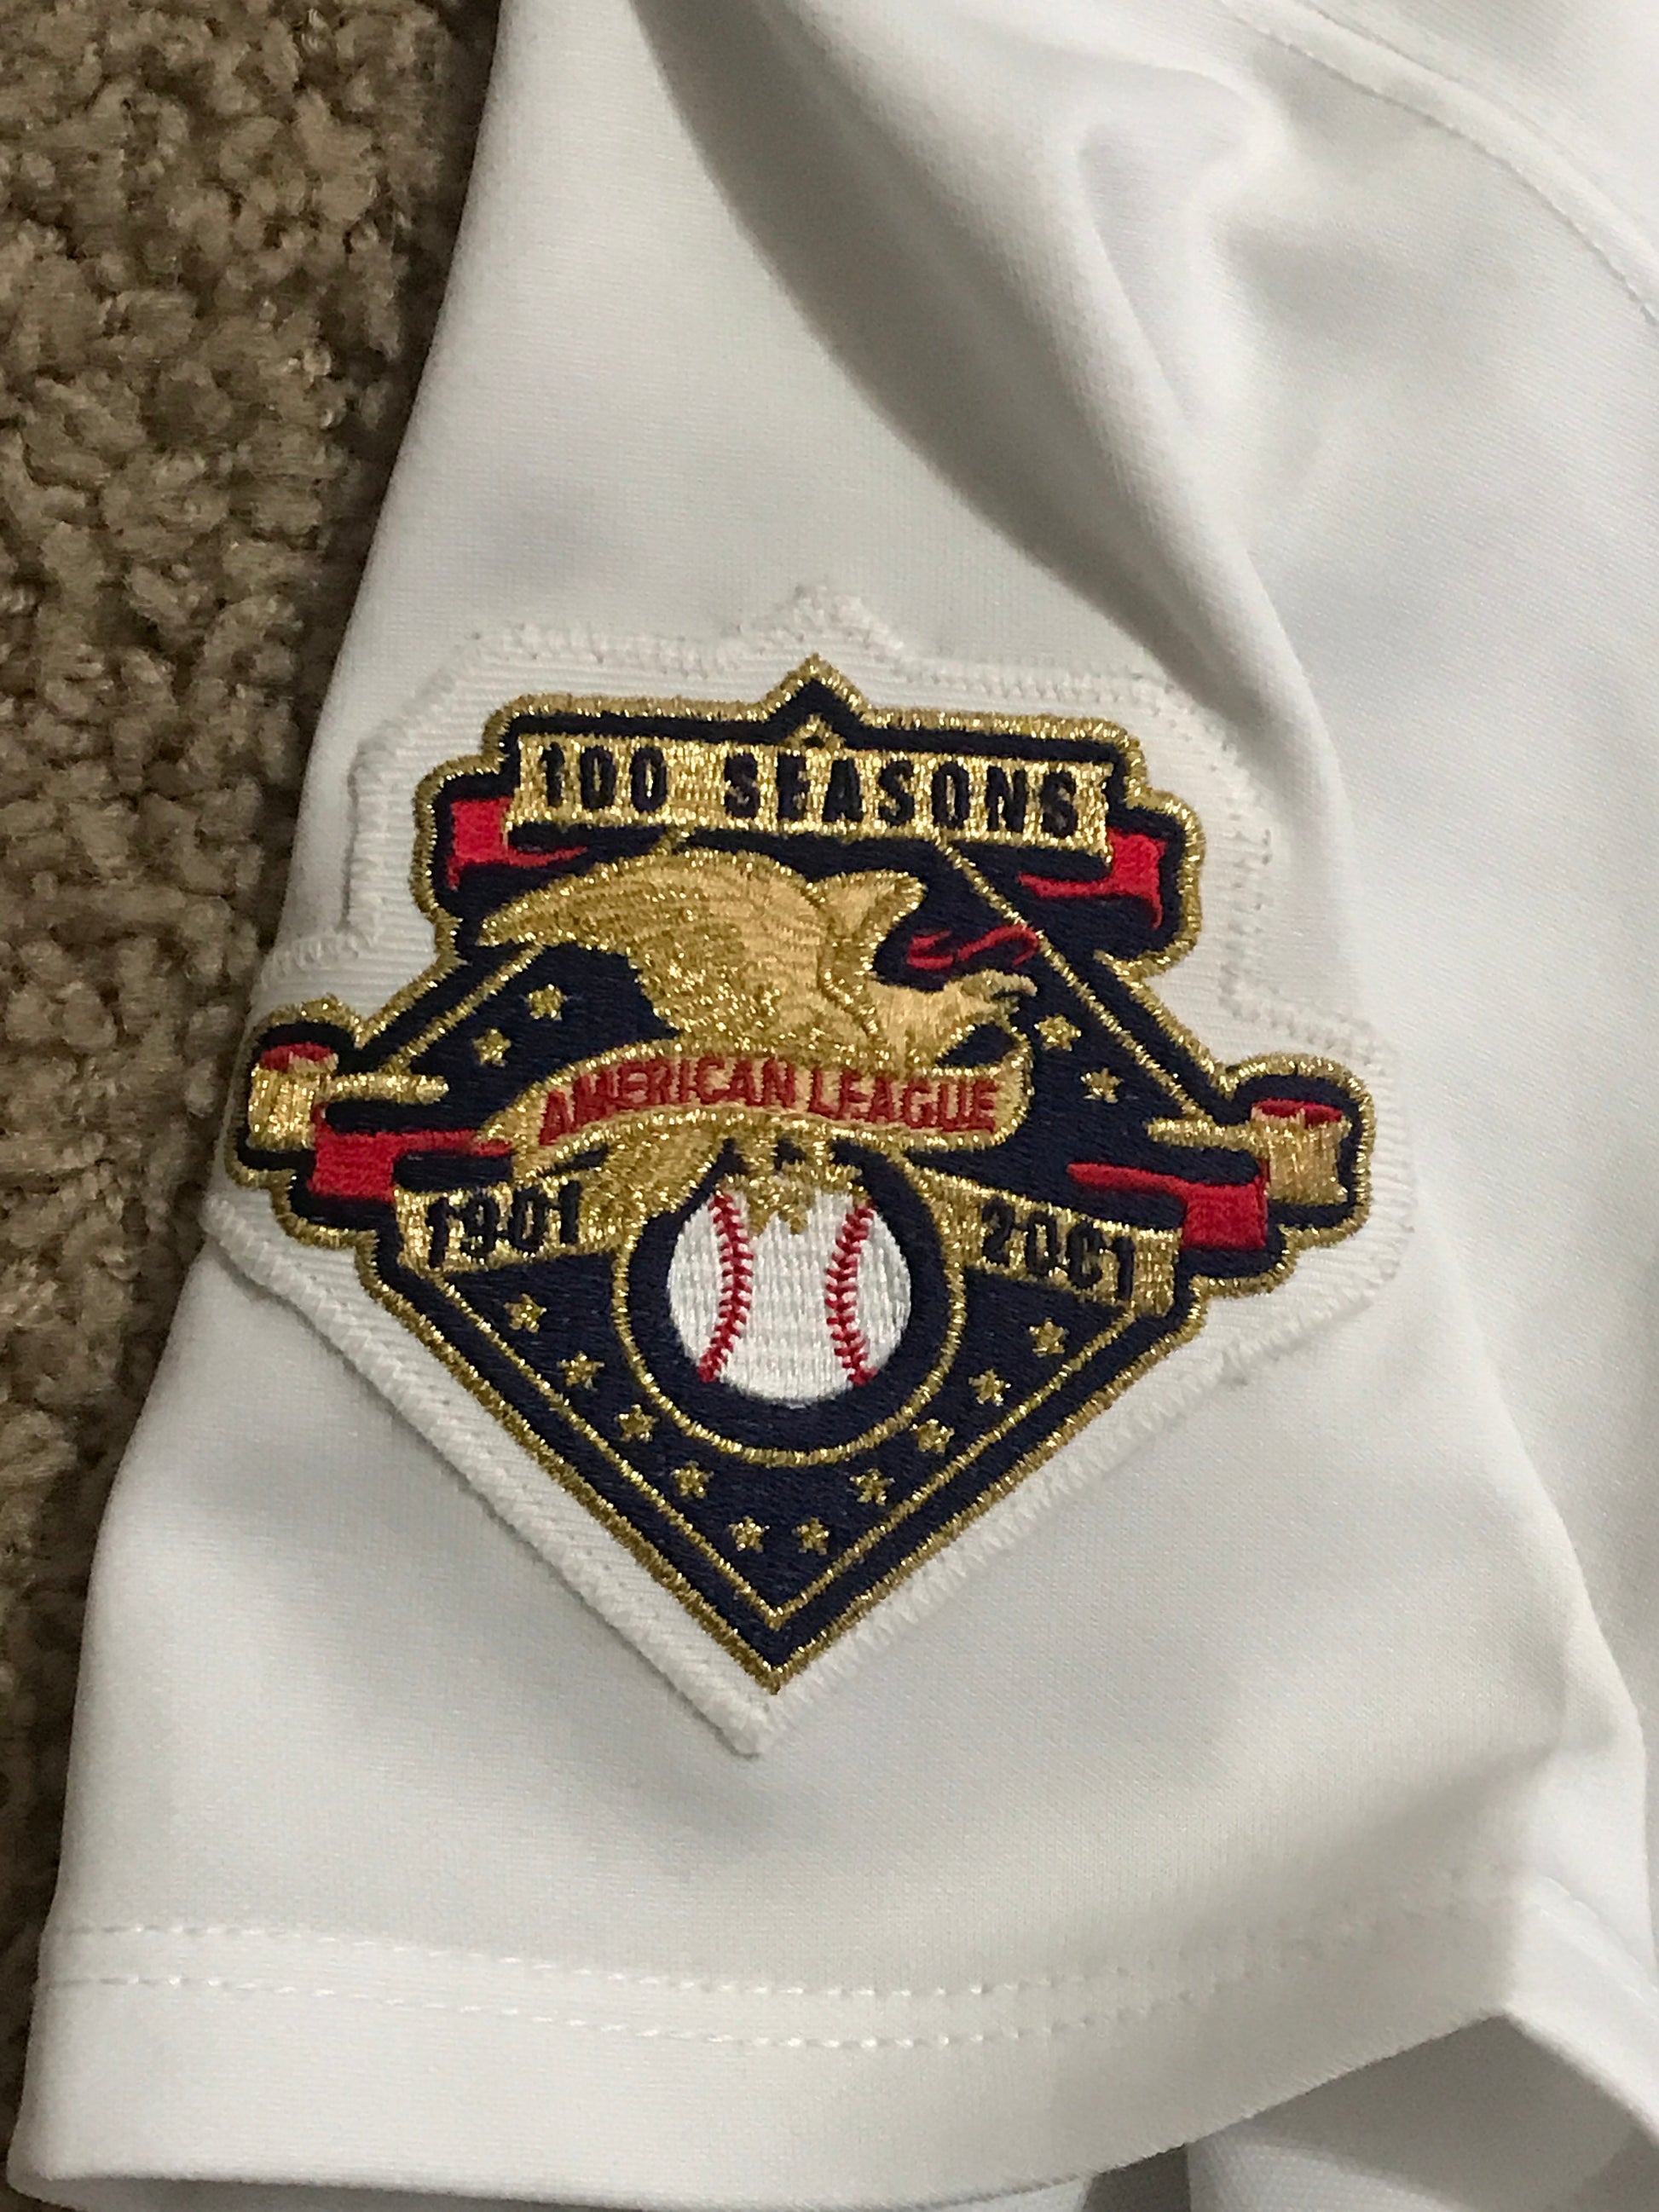 I have a no Name/Number 2001 ASG jersey. What should I do with it? :  r/Mariners